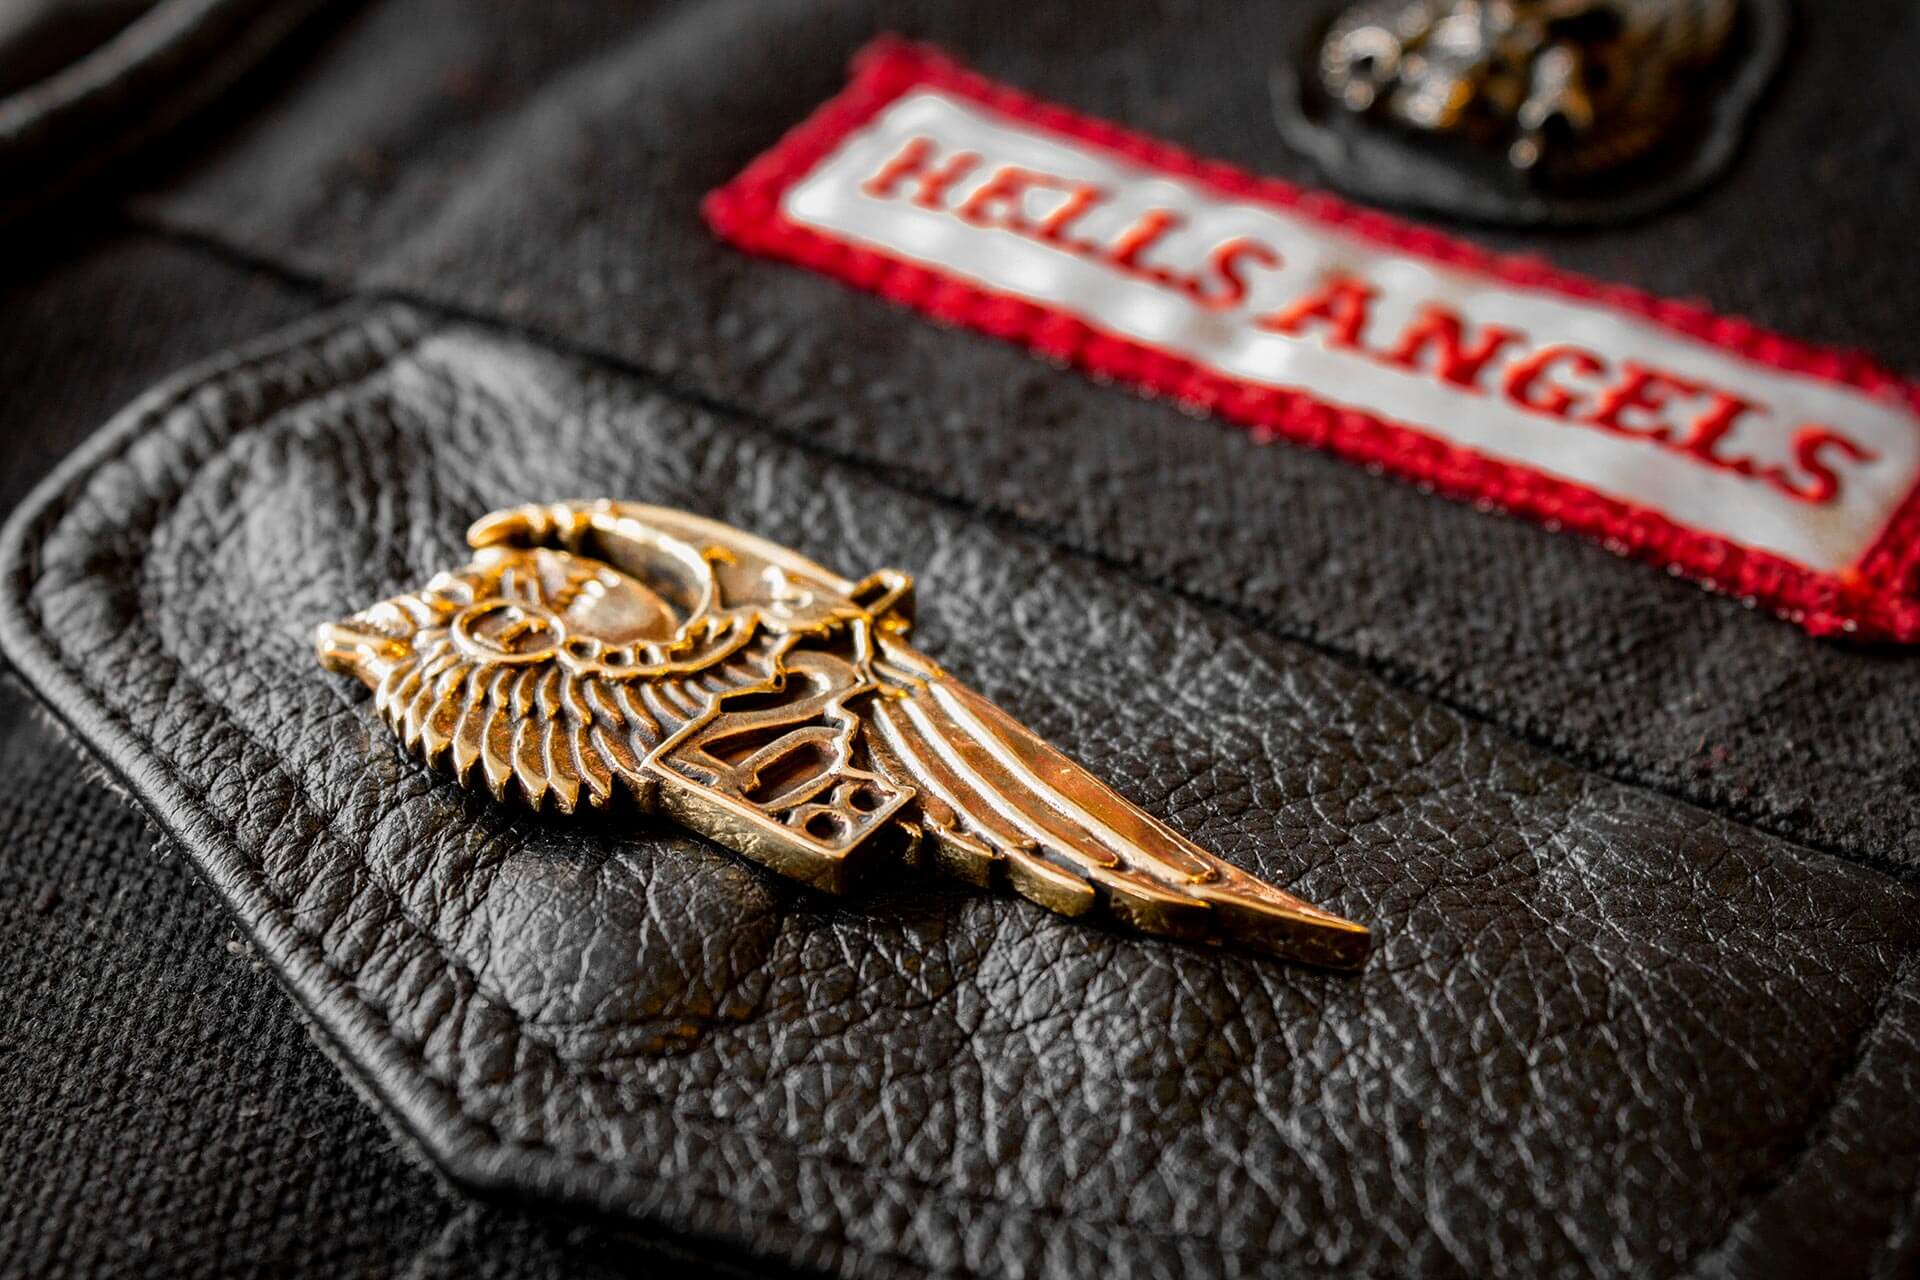 An Insider's Perspective on Hells Angels Nomads